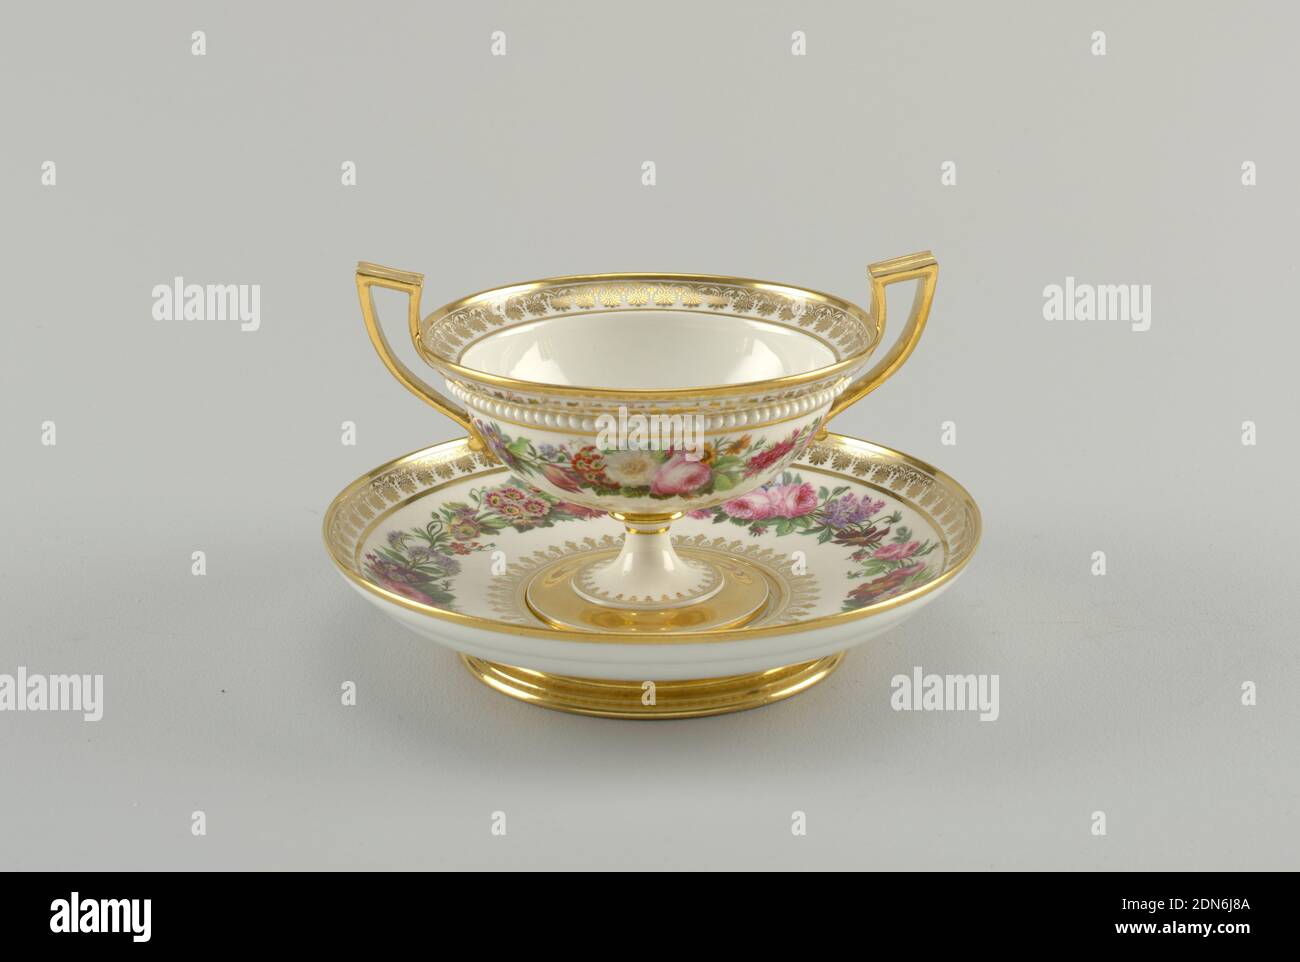 Compote and Stand, Sèvres Porcelain Manufactory, French, established 1756 to the present, hard paste porcelain, vitreous enamel, gold, France, 1832, ceramics, Decorative Arts, compote and stand, compote and stand Stock Photo